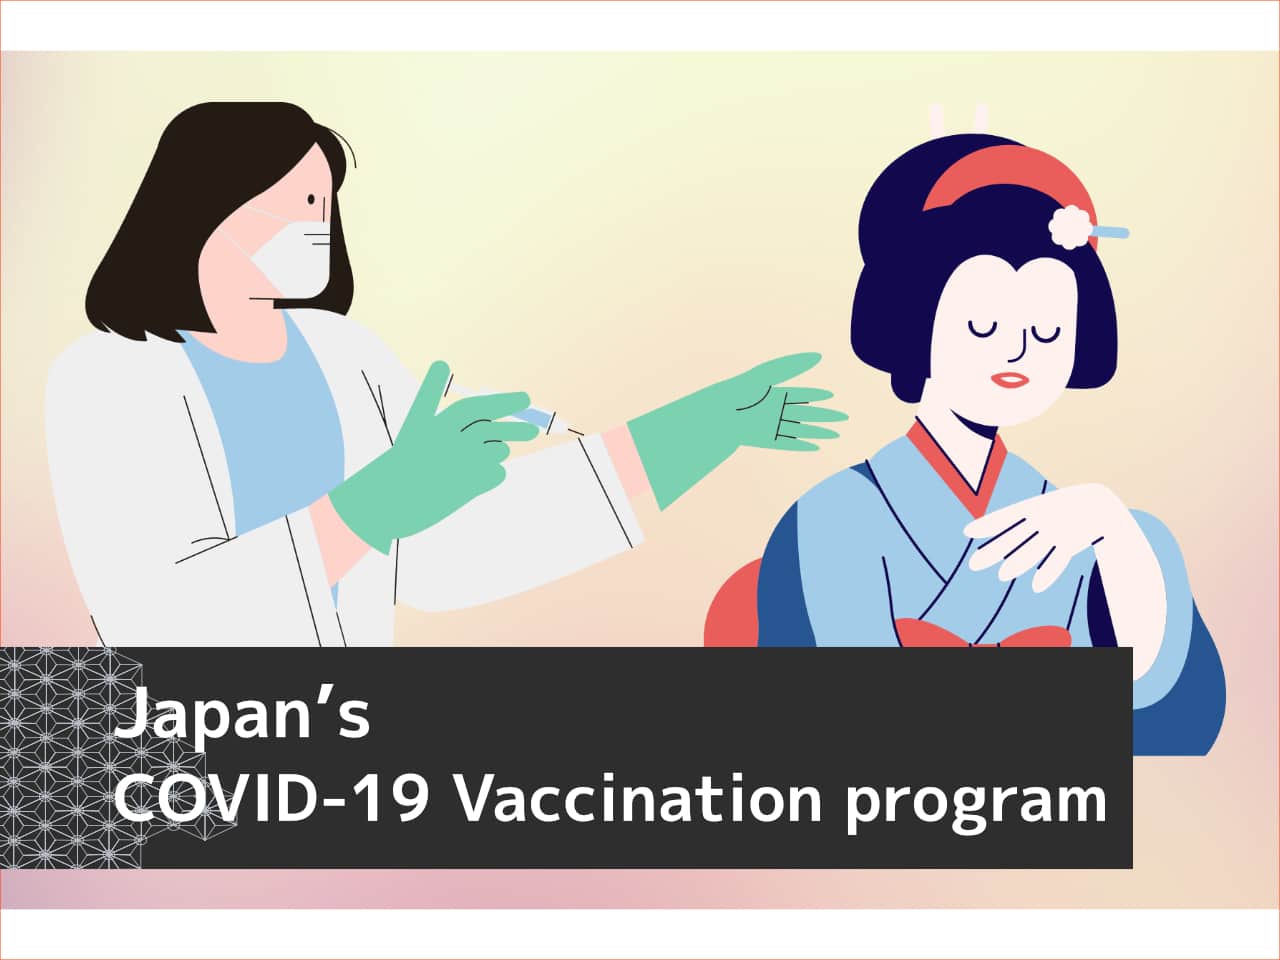 When will Covid-19 vaccines in Japan be available to general population?